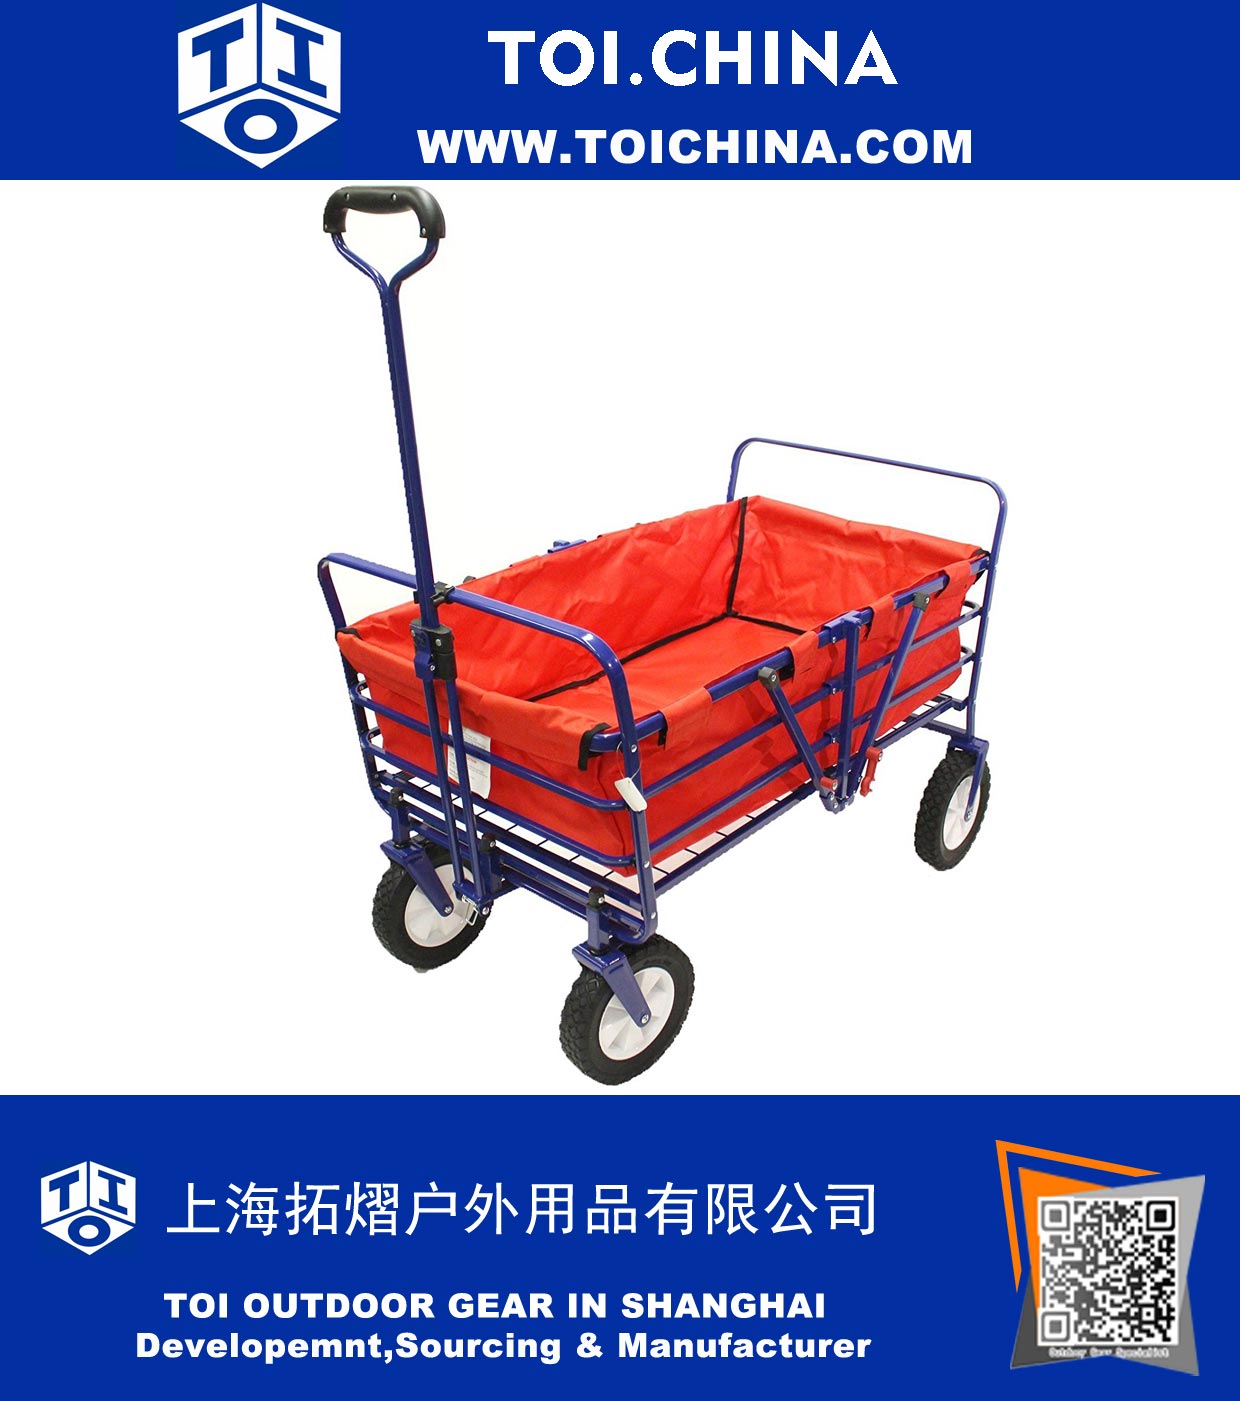 Folding Wagon Field Work Garden Utility Cart with Polyester Basket, Spring Bounce Feature, Auto Safety Locks, Handle Steering